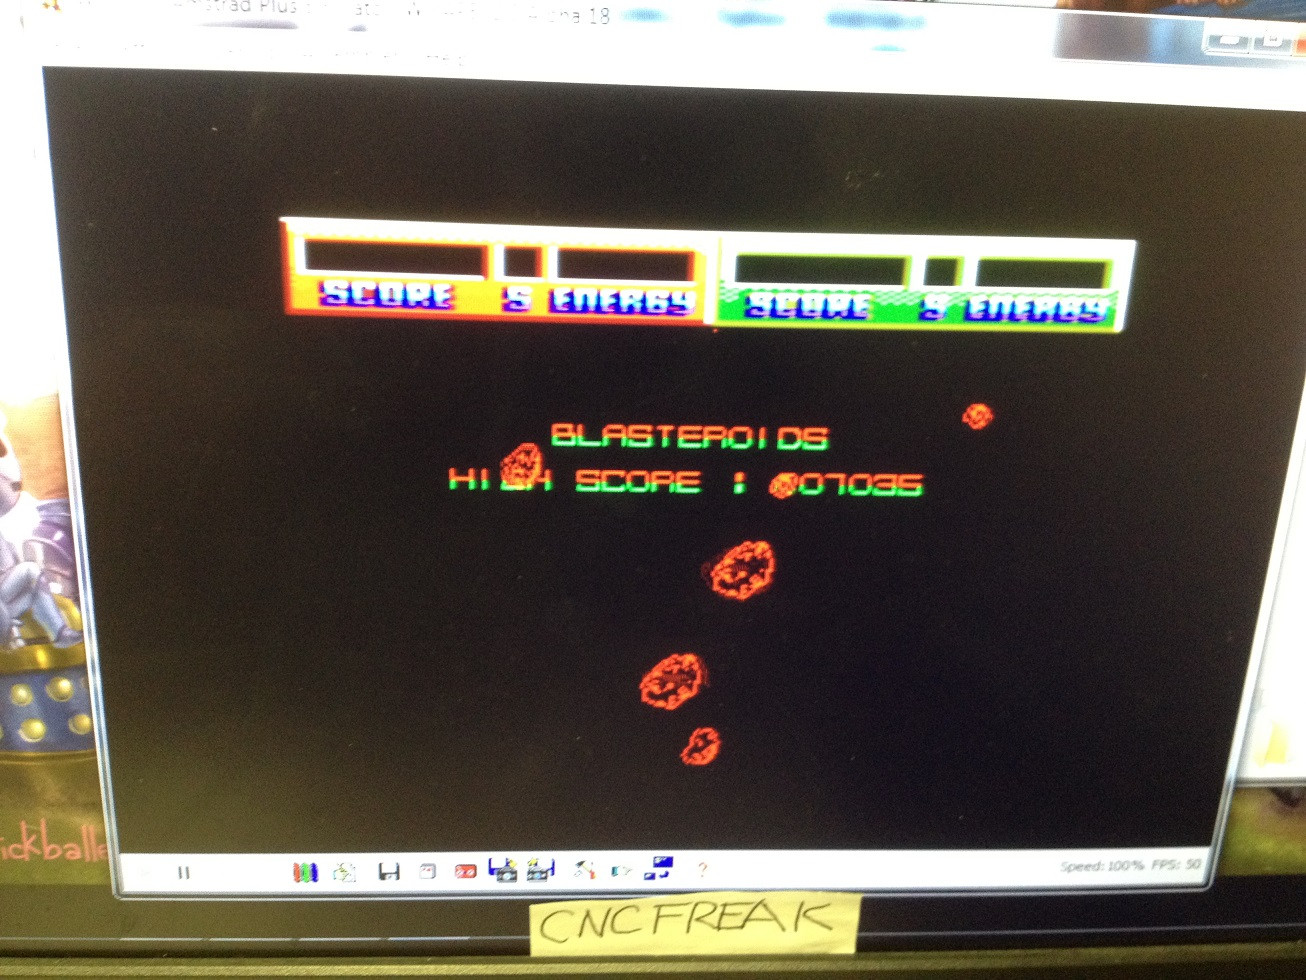 cncfreak: Blasteroids (Amstrad CPC Emulated) 7,035 points on 2013-10-16 06:46:40